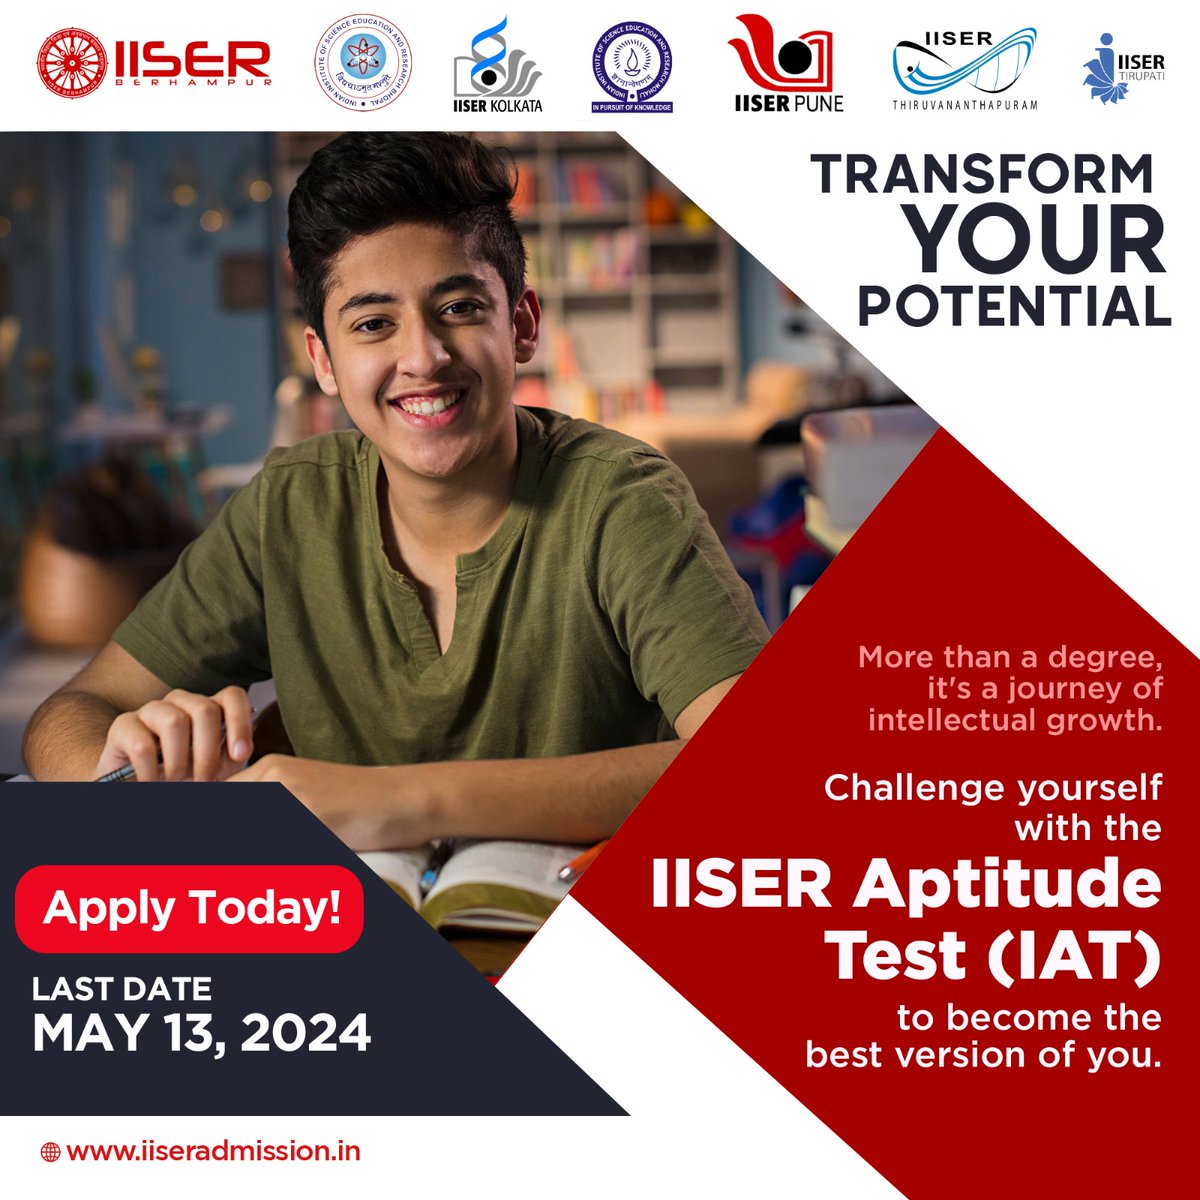 Calling all science enthusiasts! Applications for BS & BS-MS programs at #IISERs are open. Apply for the IISER Aptitude Test (IAT) by May 13th, 2024! Test on June 9th, 2024. Visit iiseradmission.in #AdmissionsOpen #IAT2024 #ScienceEducation #Research #BSMS